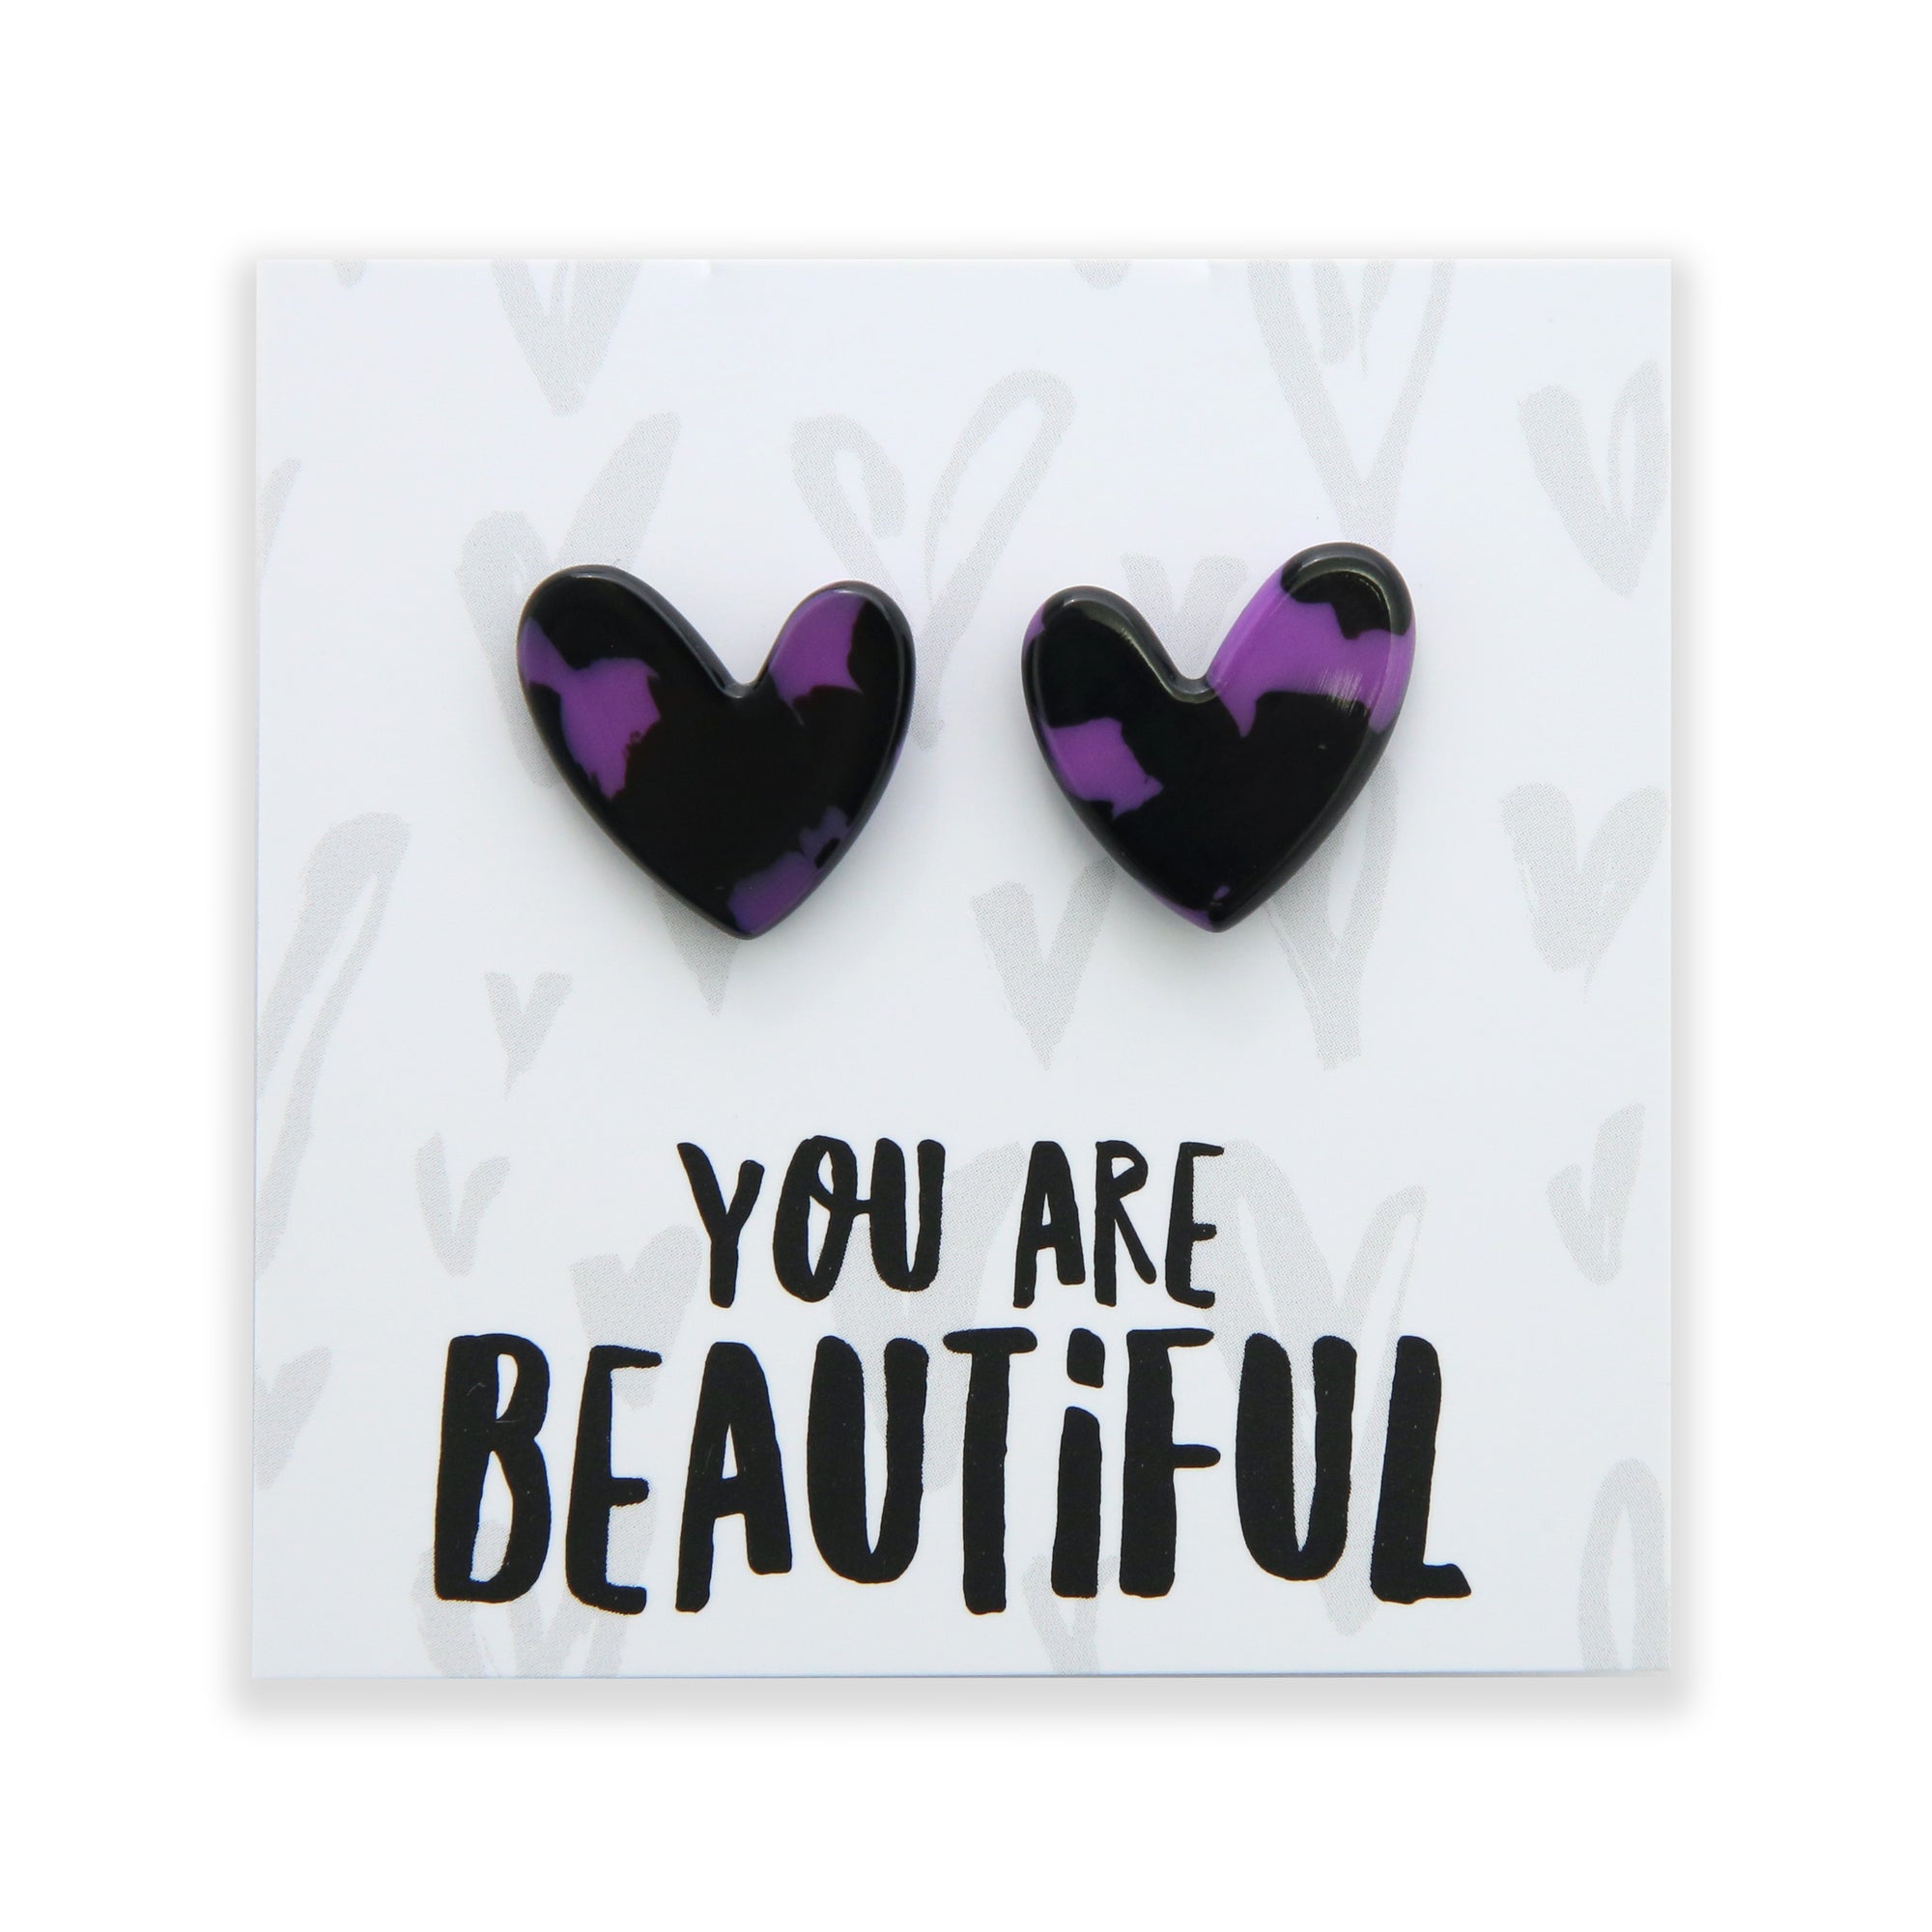 You Are Beautiful - Resin Heart Studs - Purple Patch (12762)